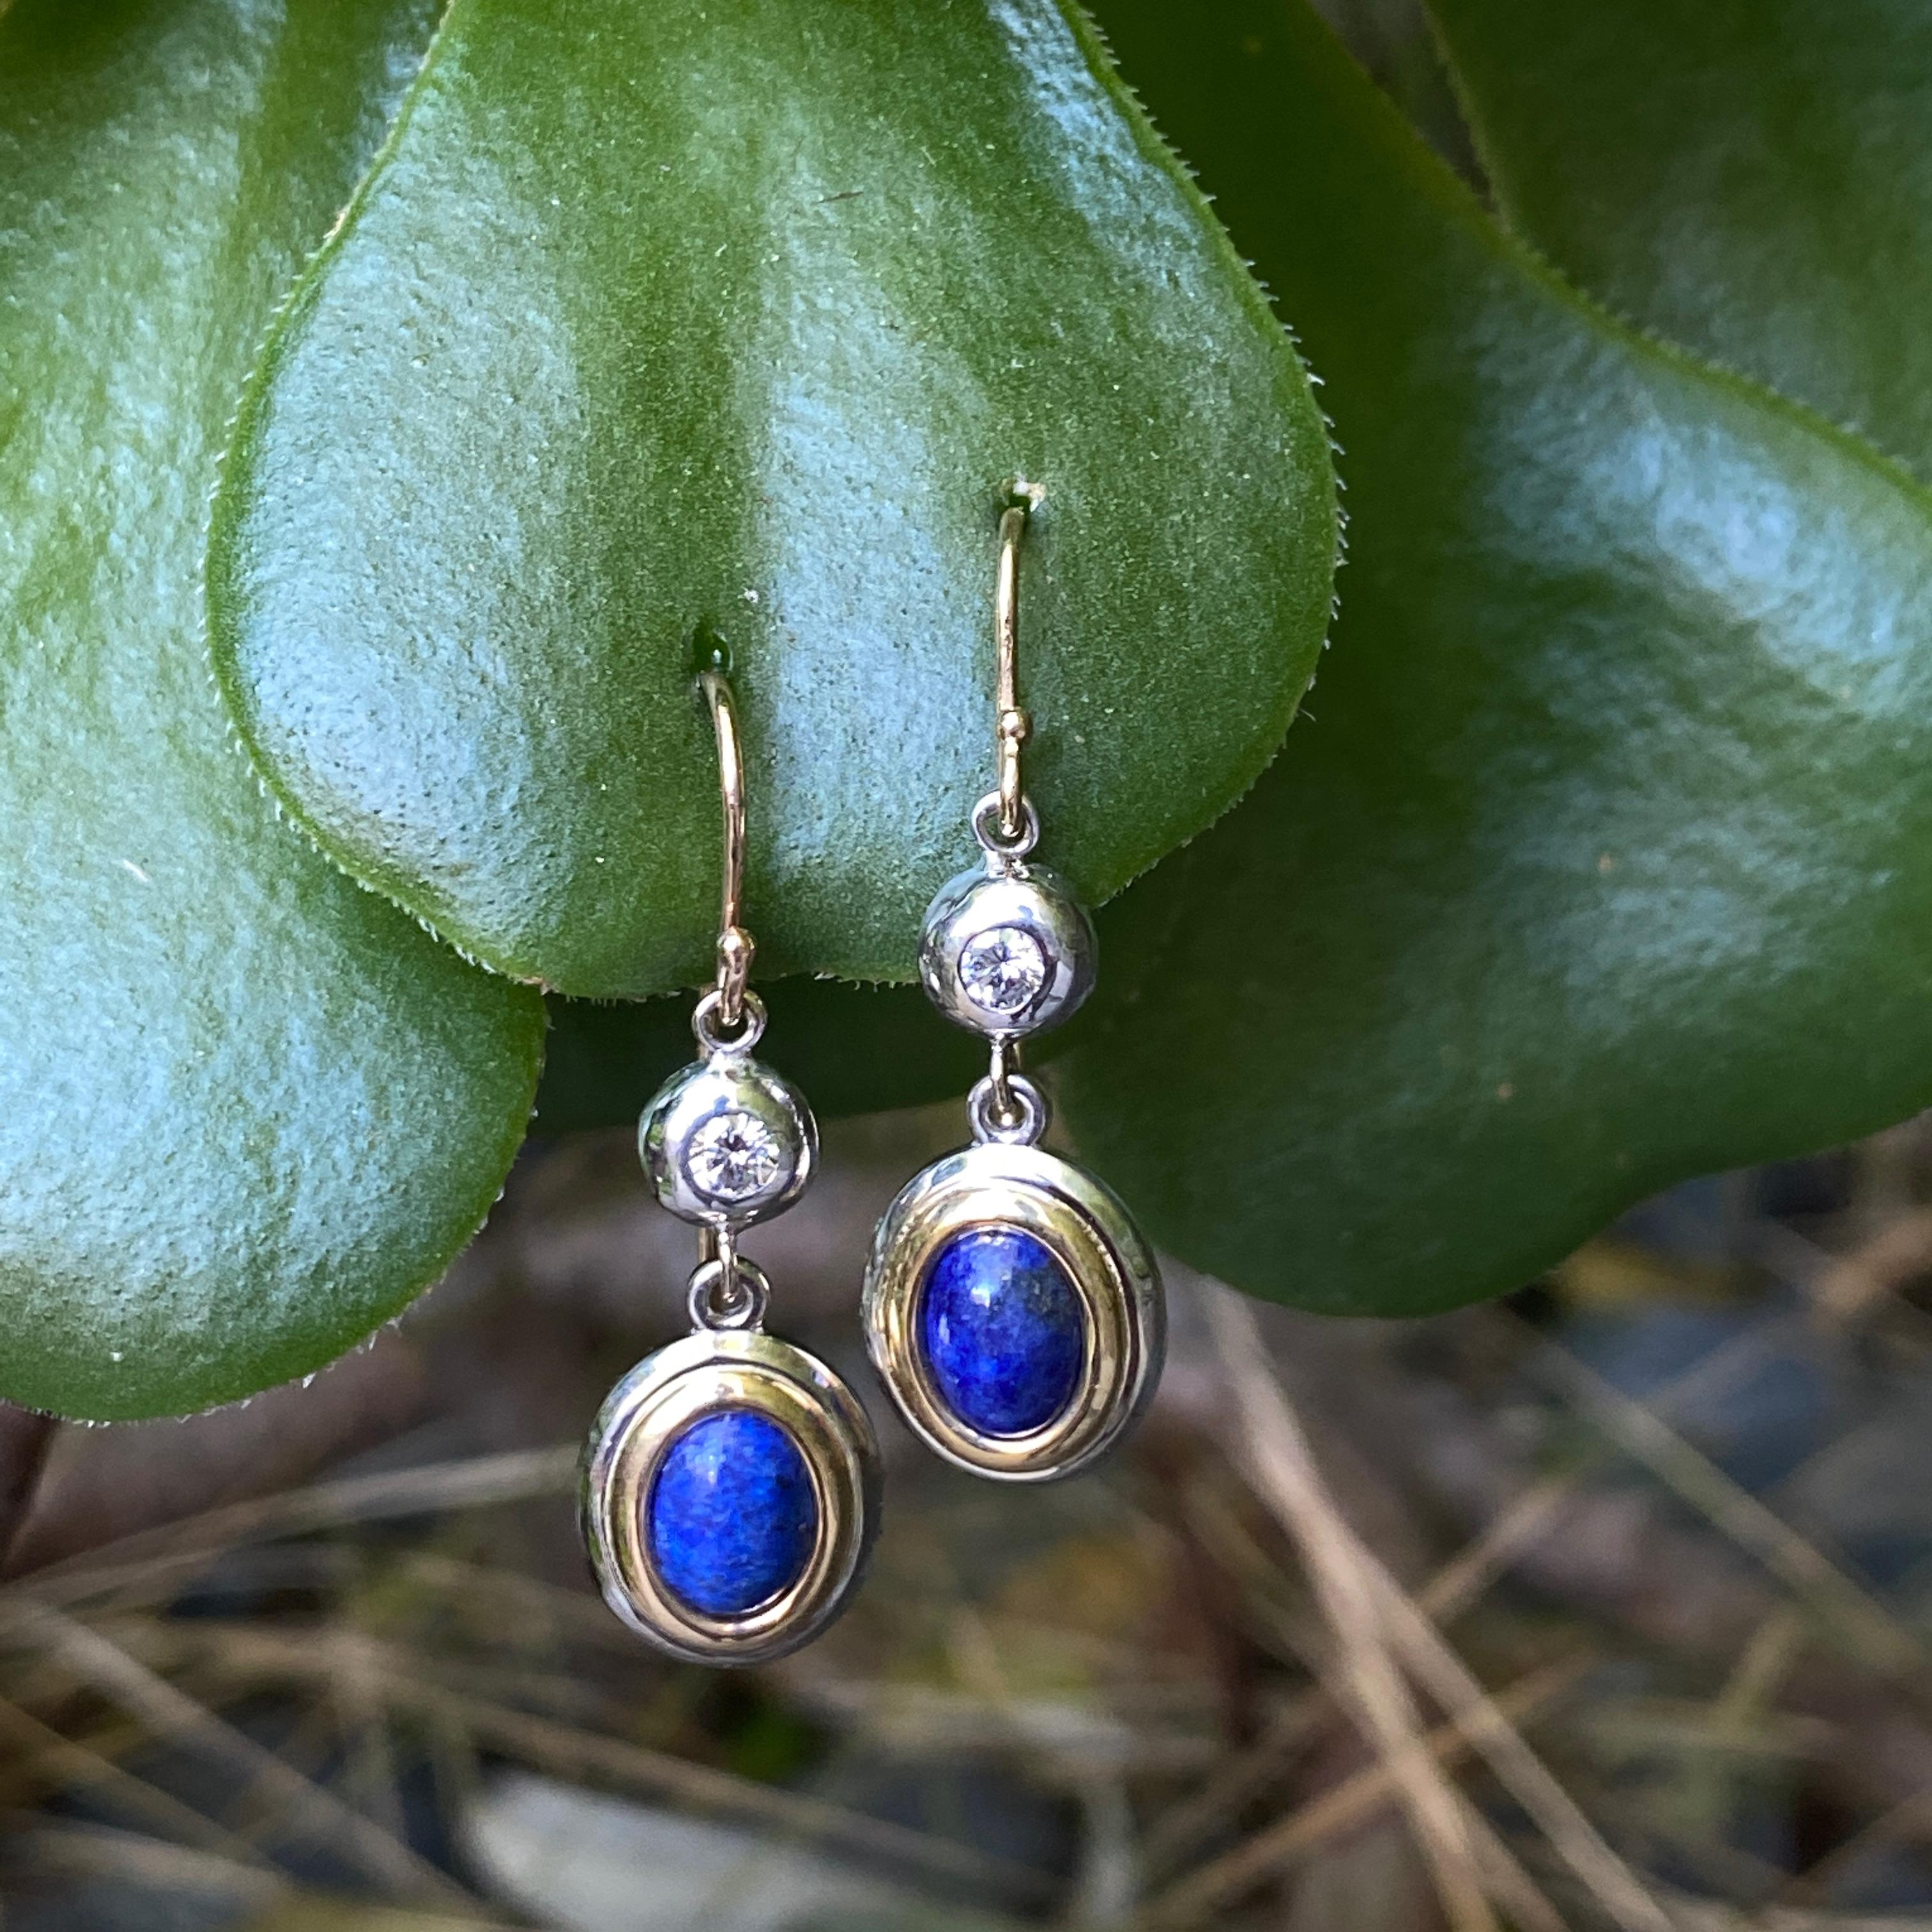 Contemporary Lapis & Diamond Dangle Earrings on Shepherd's Hook Wires in Yellow & White Gold